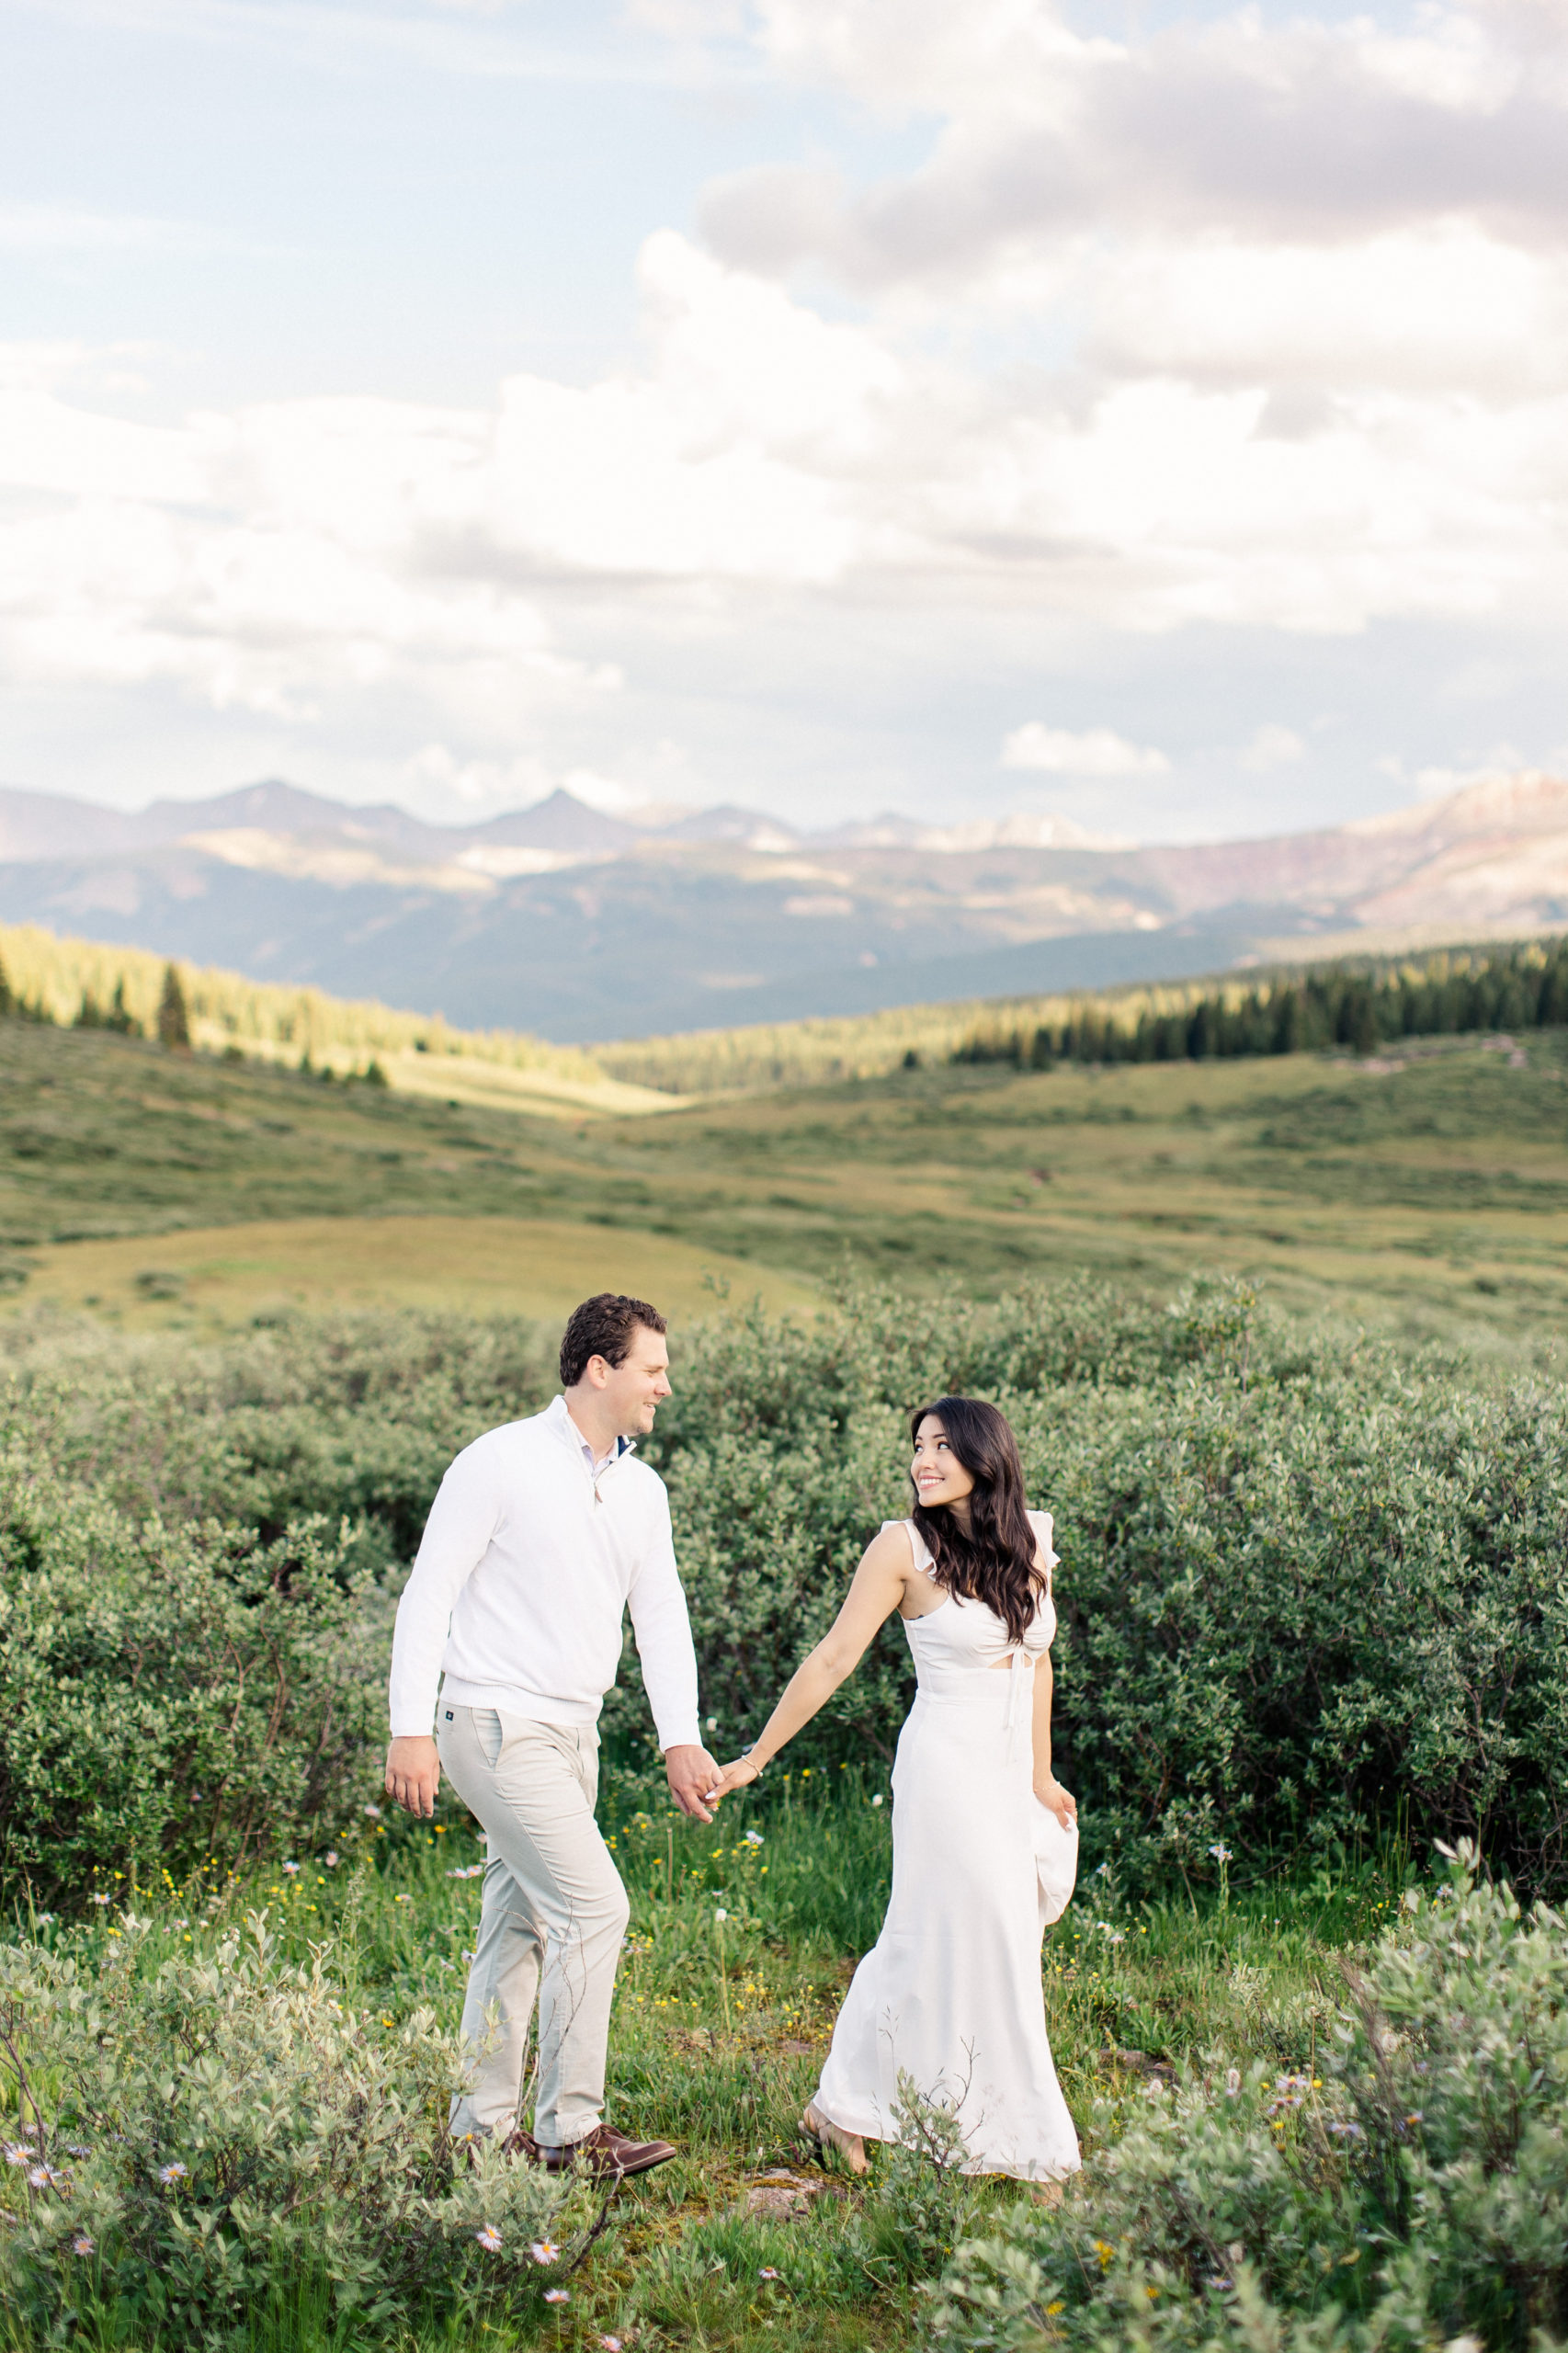 Engagement photo taken in Vail during the Summer